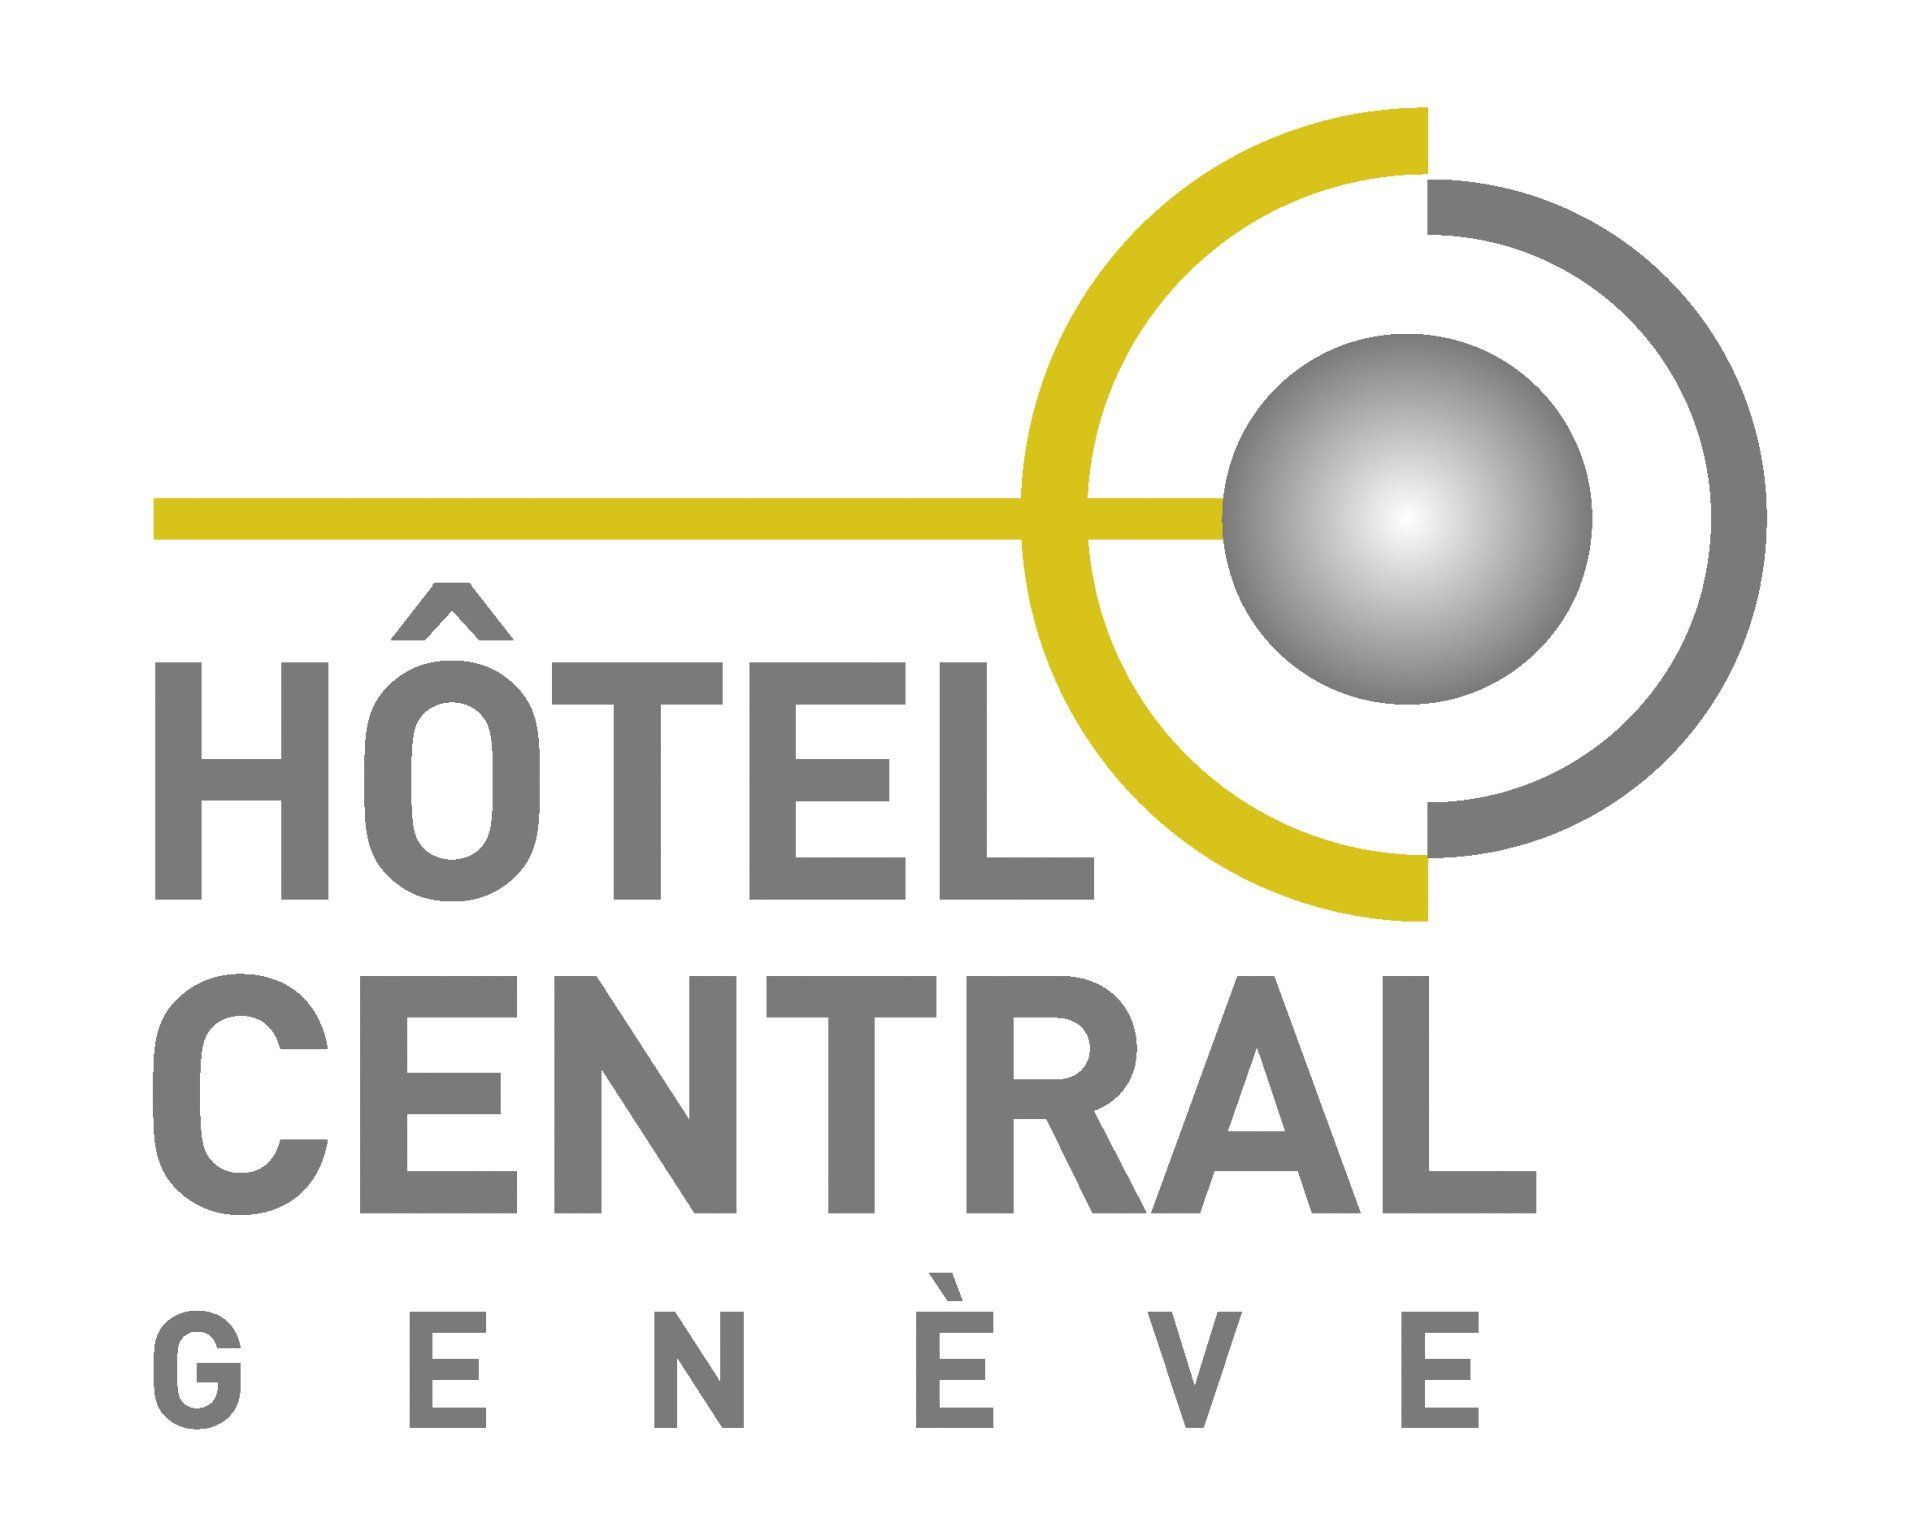 (c) Hotelcentral.ch